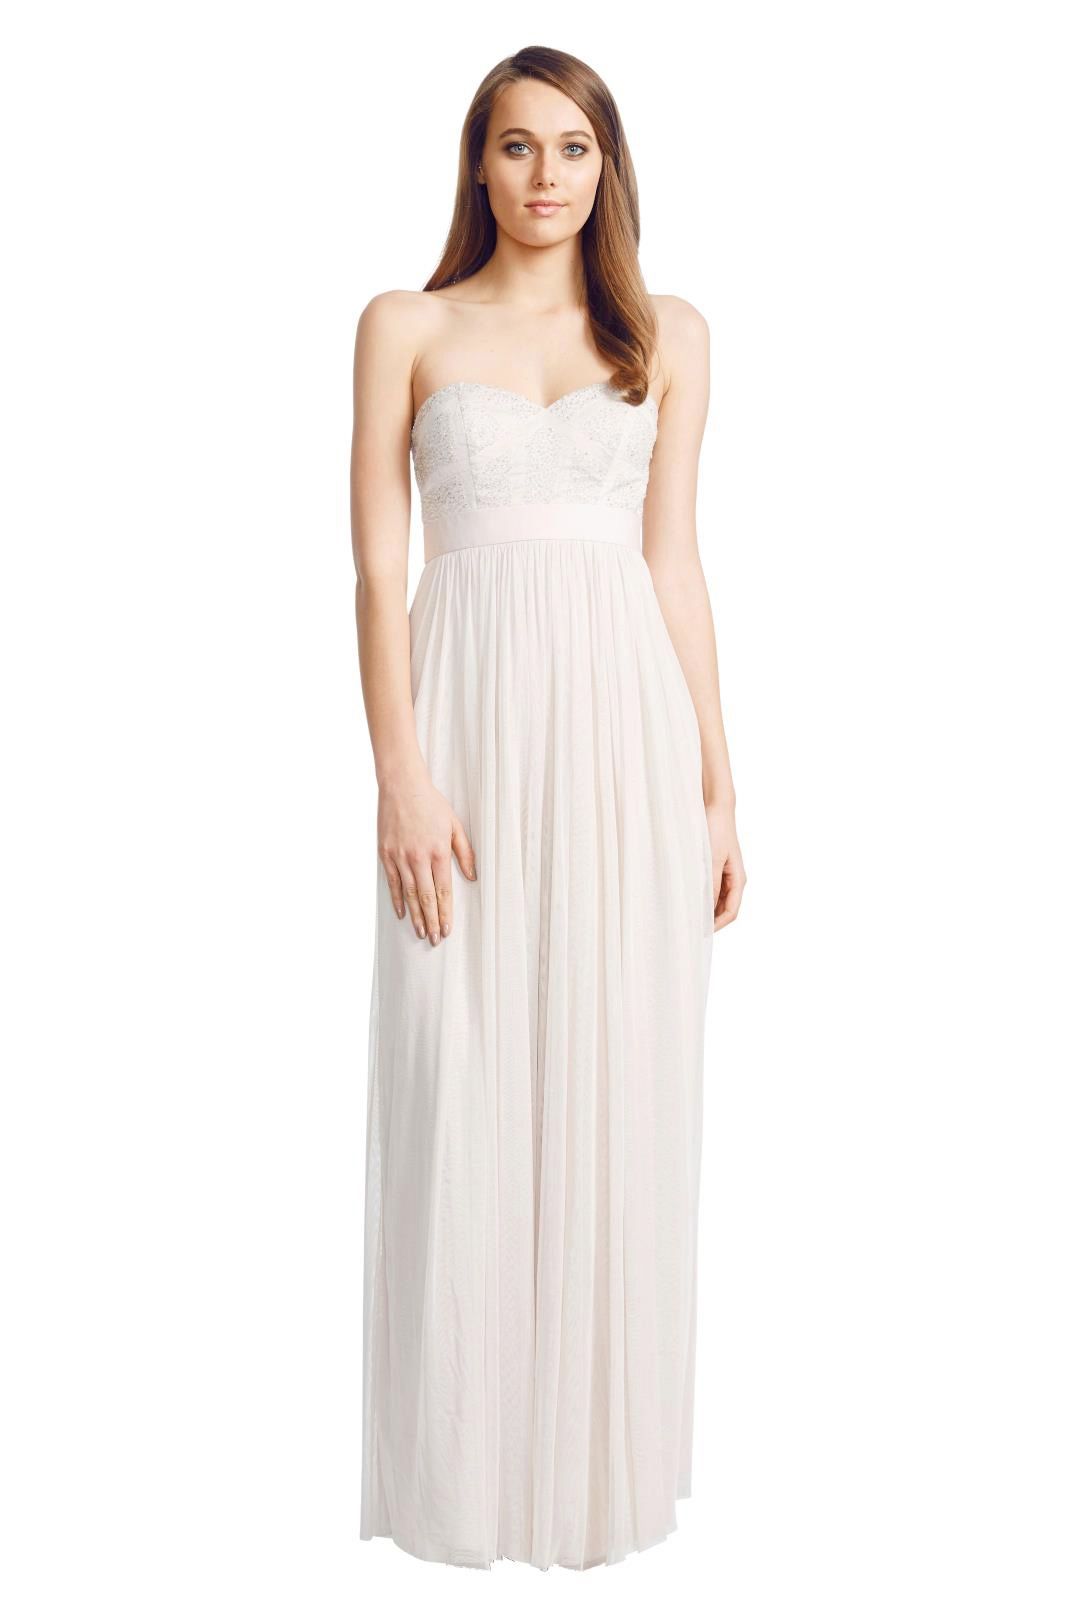 George - Pixel Gown - Shell - Front